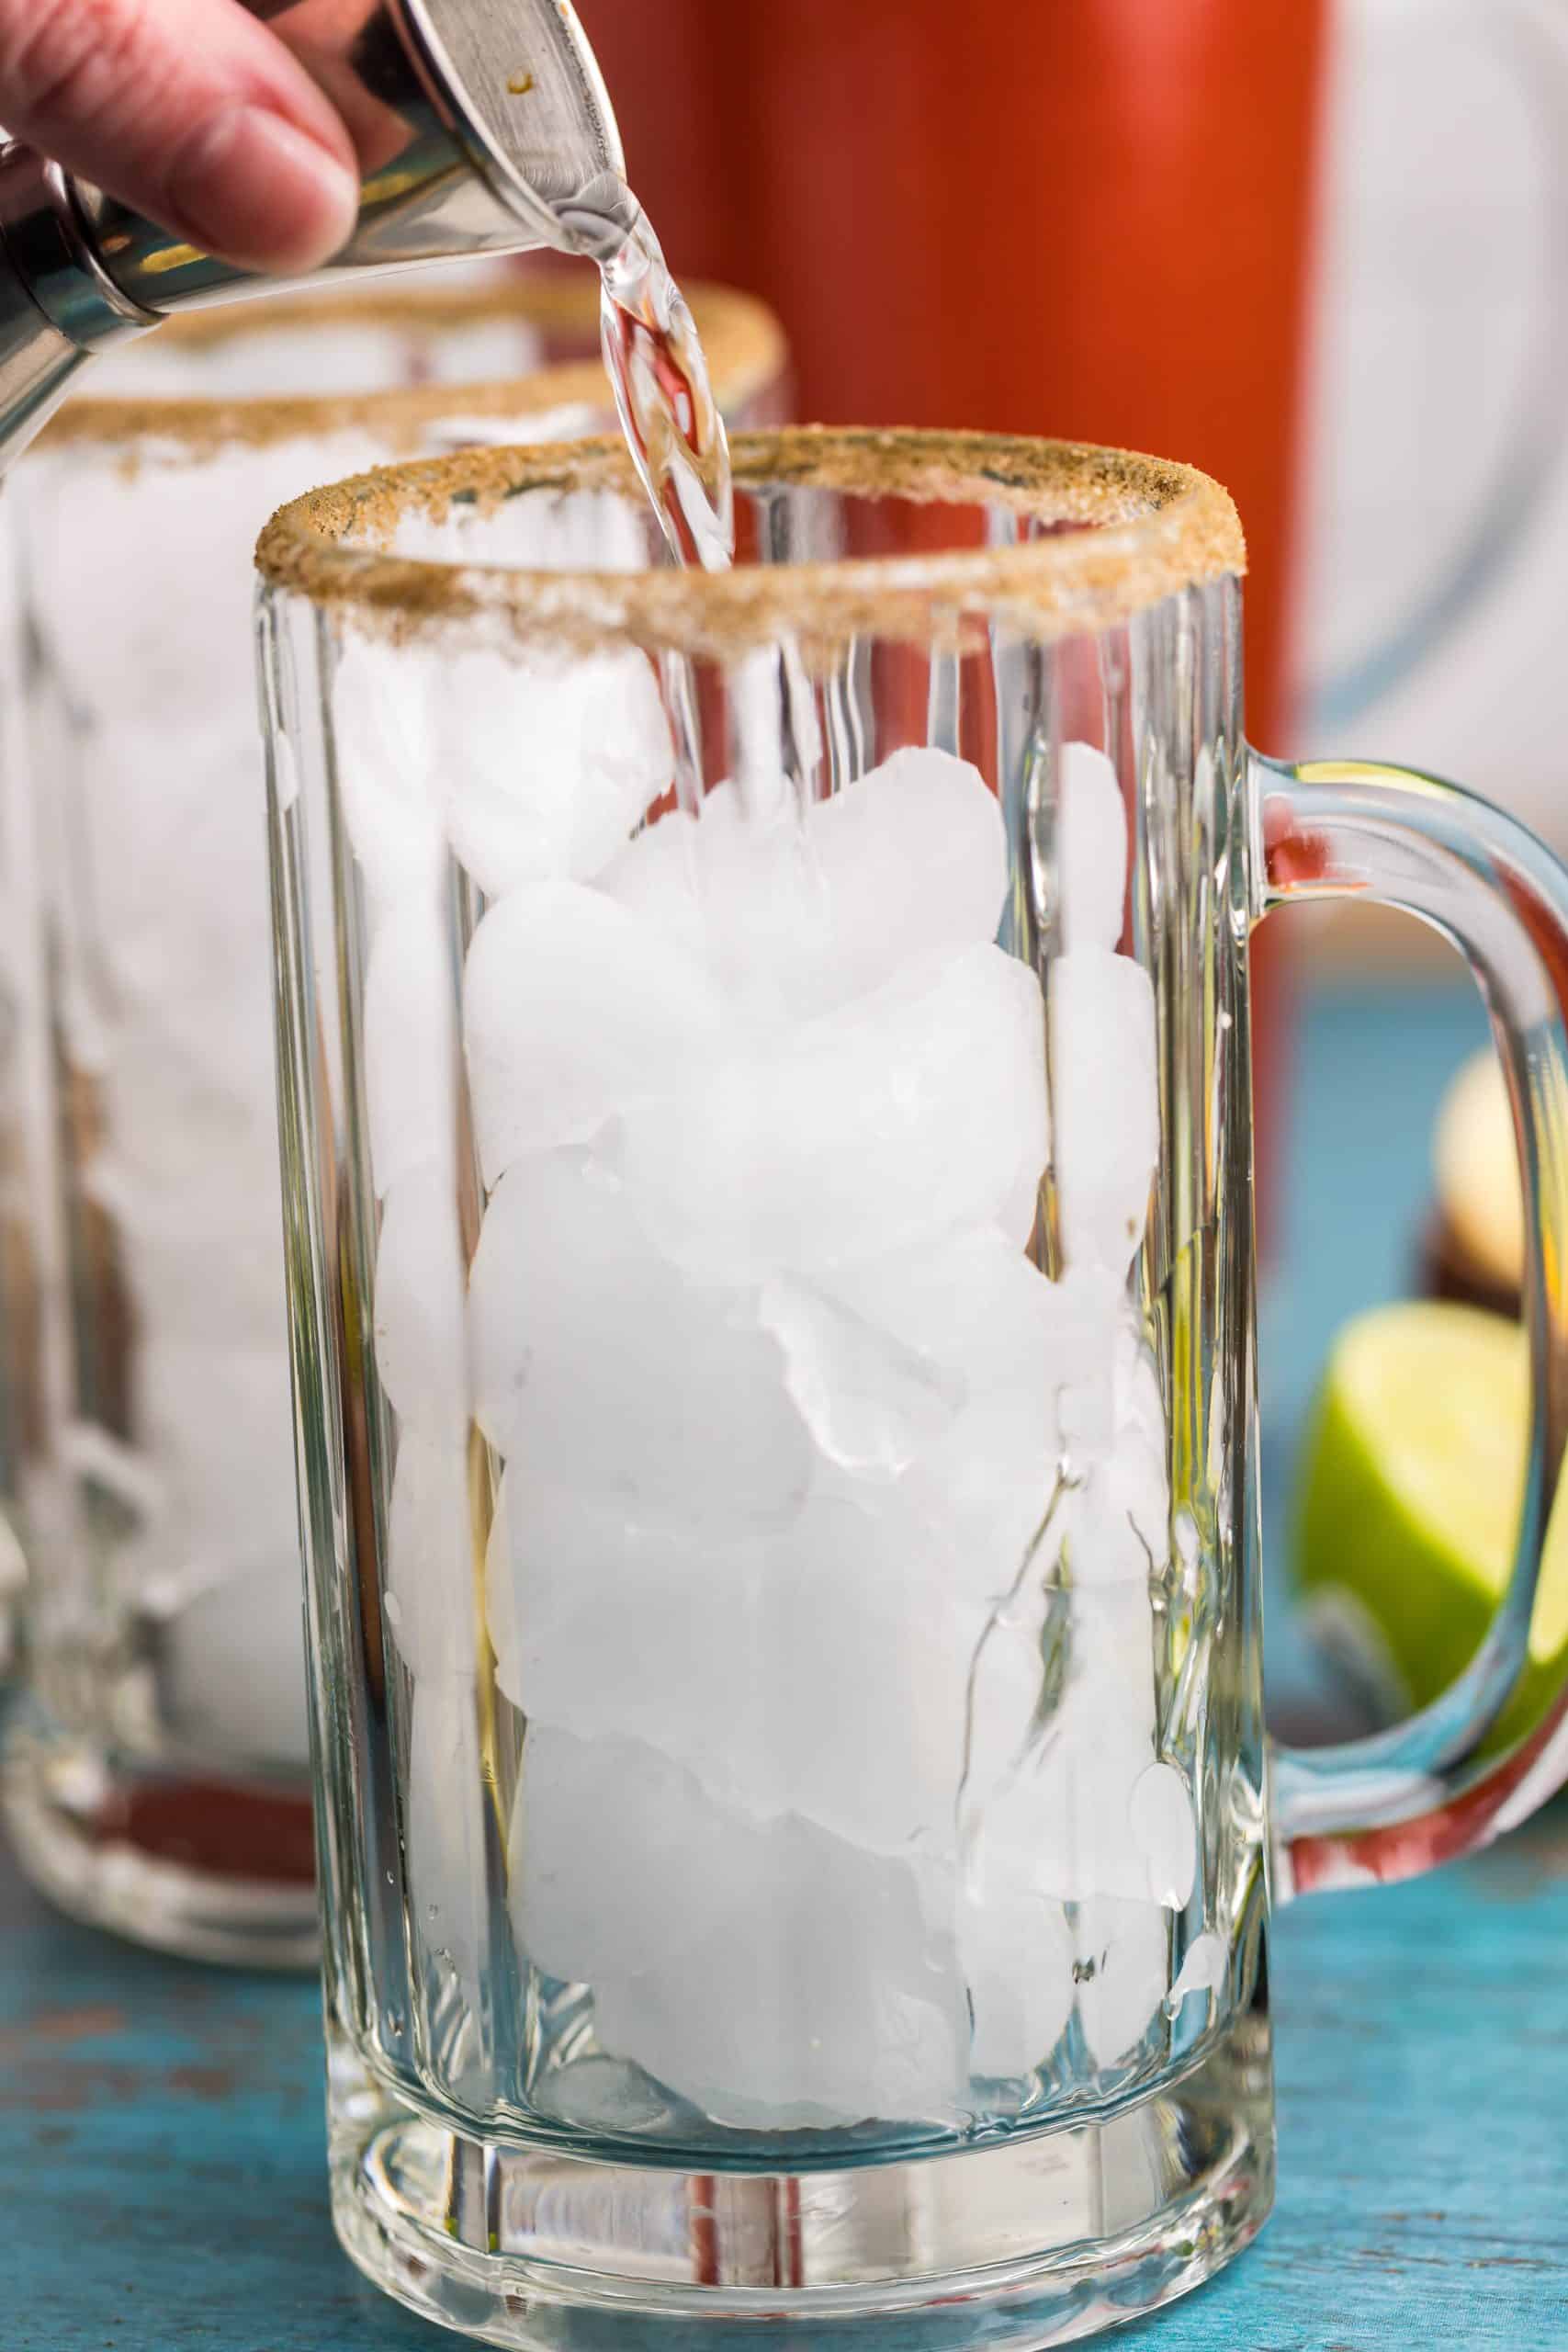 Glasses with ice and vodka being poured into them.